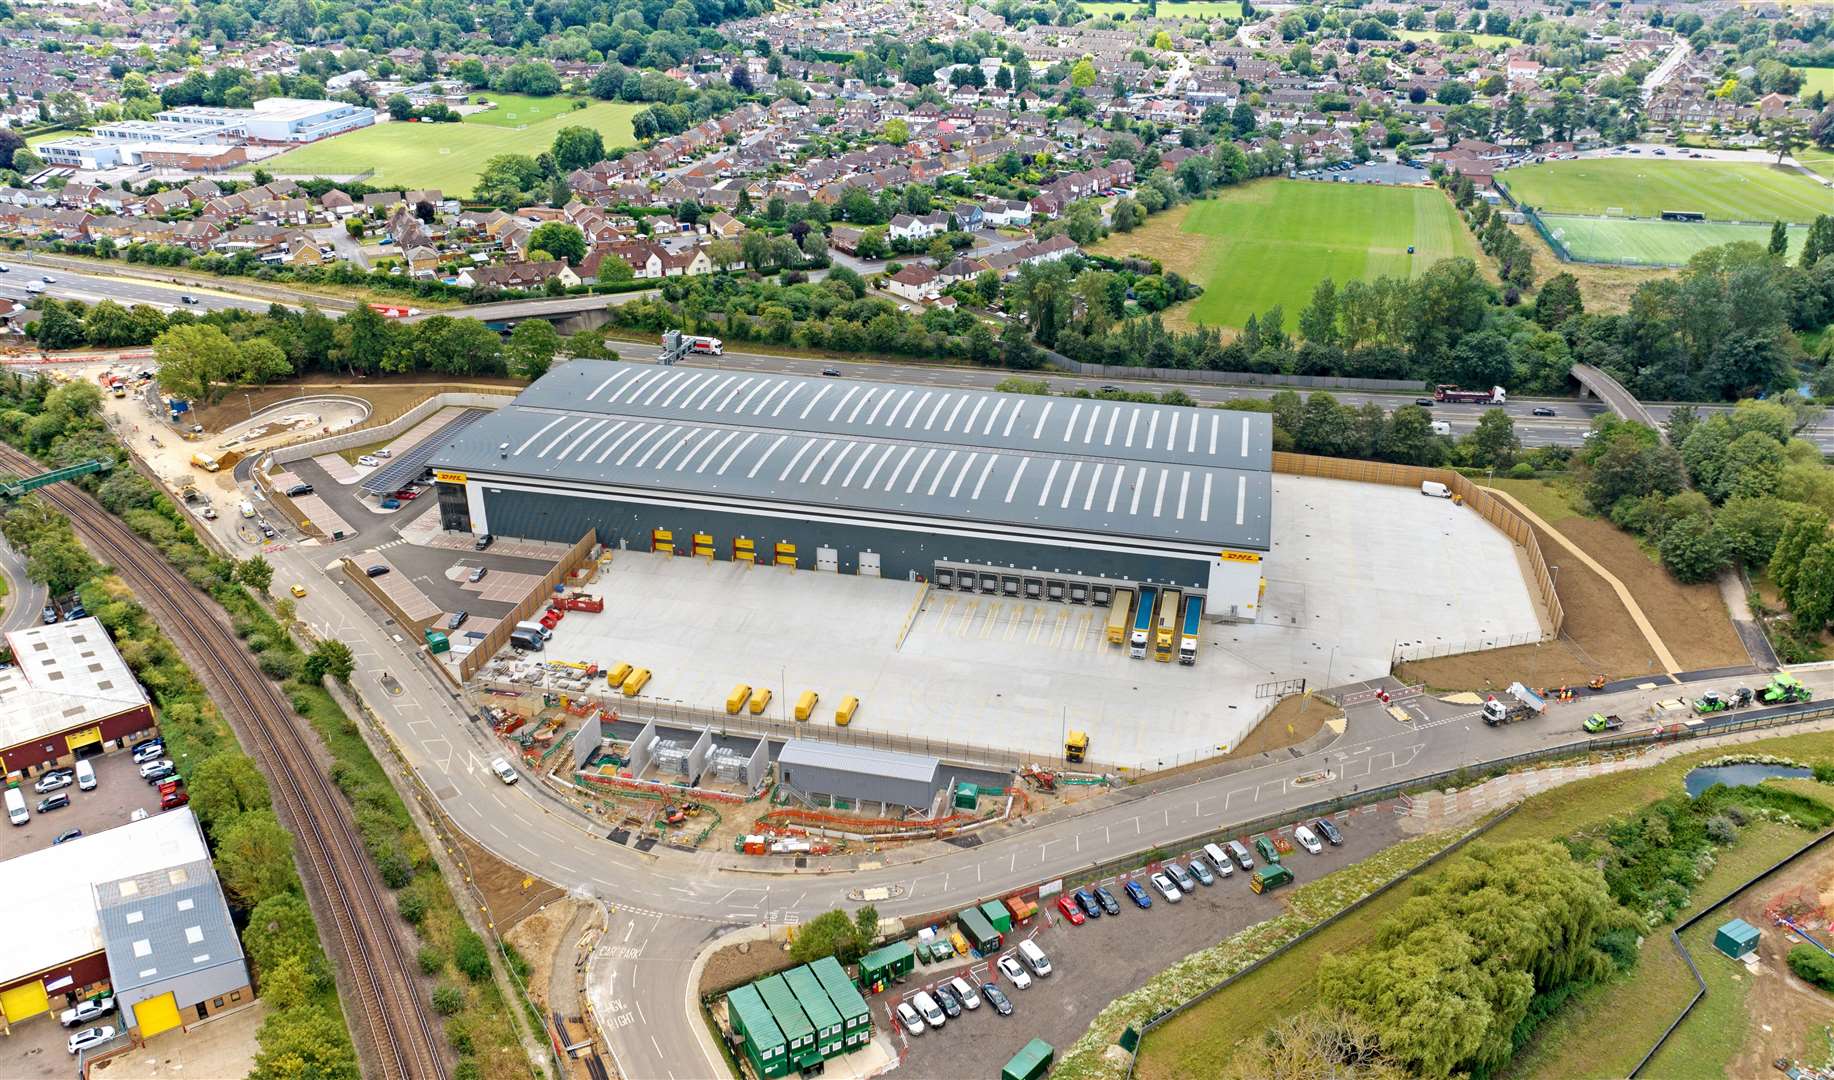 Delivery company DHL is one of the latest to move into the logistics park